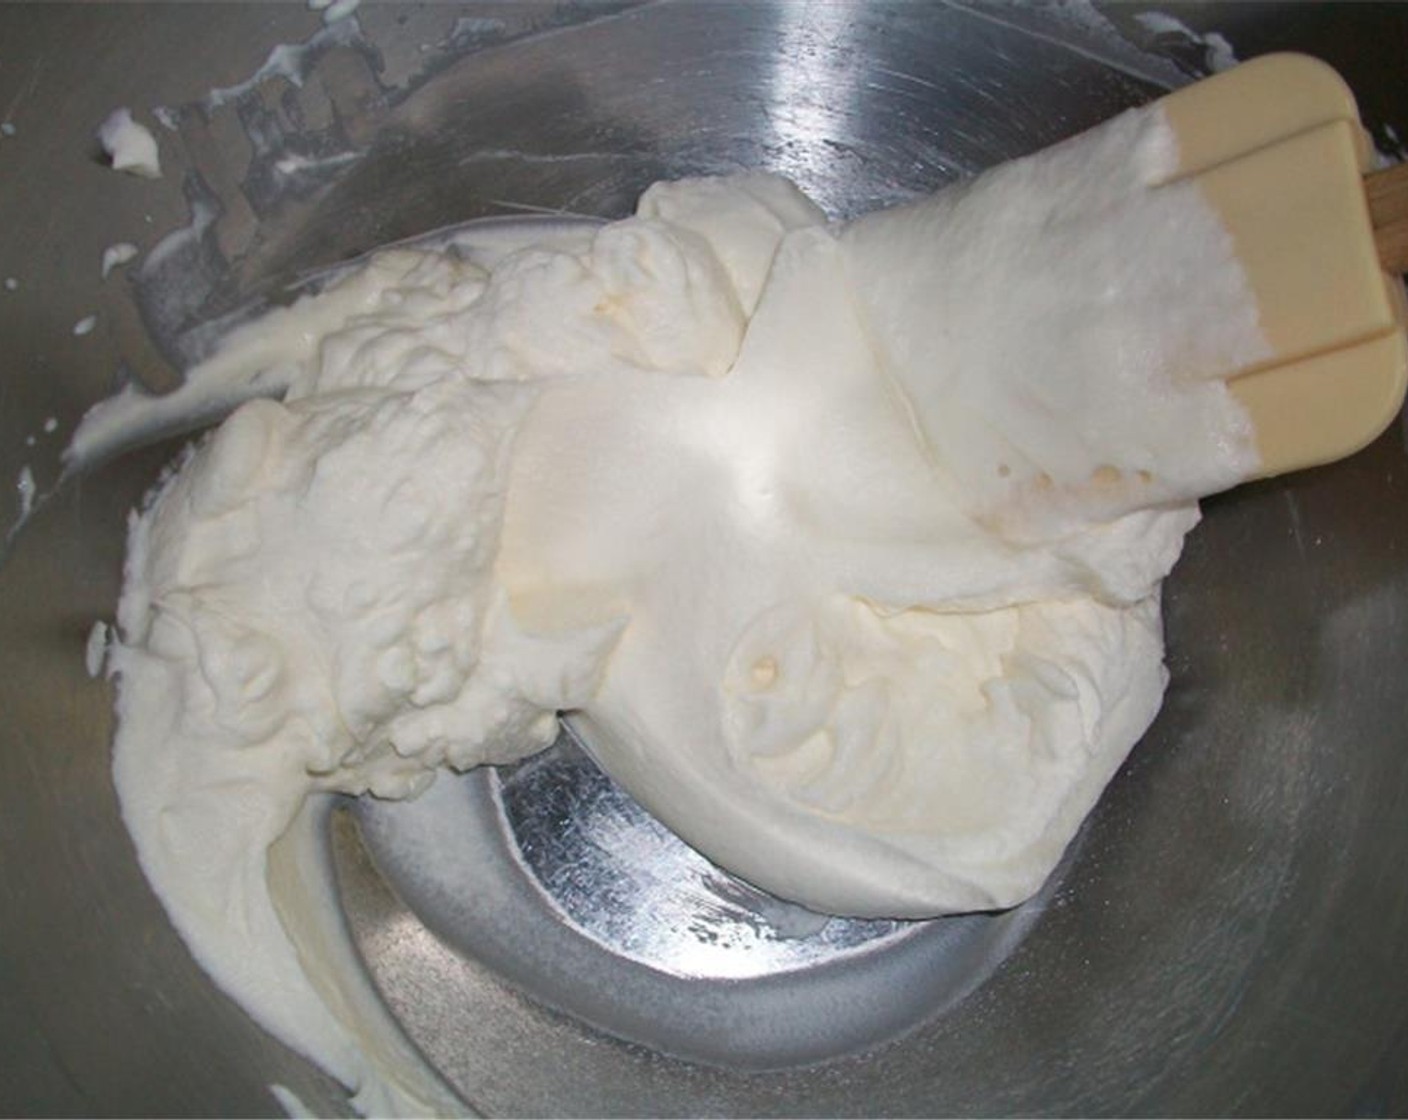 step 7 For whipped cream, start with Heavy Cream (2 cups) and add Powdered Confectioners Sugar (2 Tbsp) and Vanilla Extract (1 Tbsp). Using an electric mixer, beat for about 5 minutes until it is the consistancy you want.